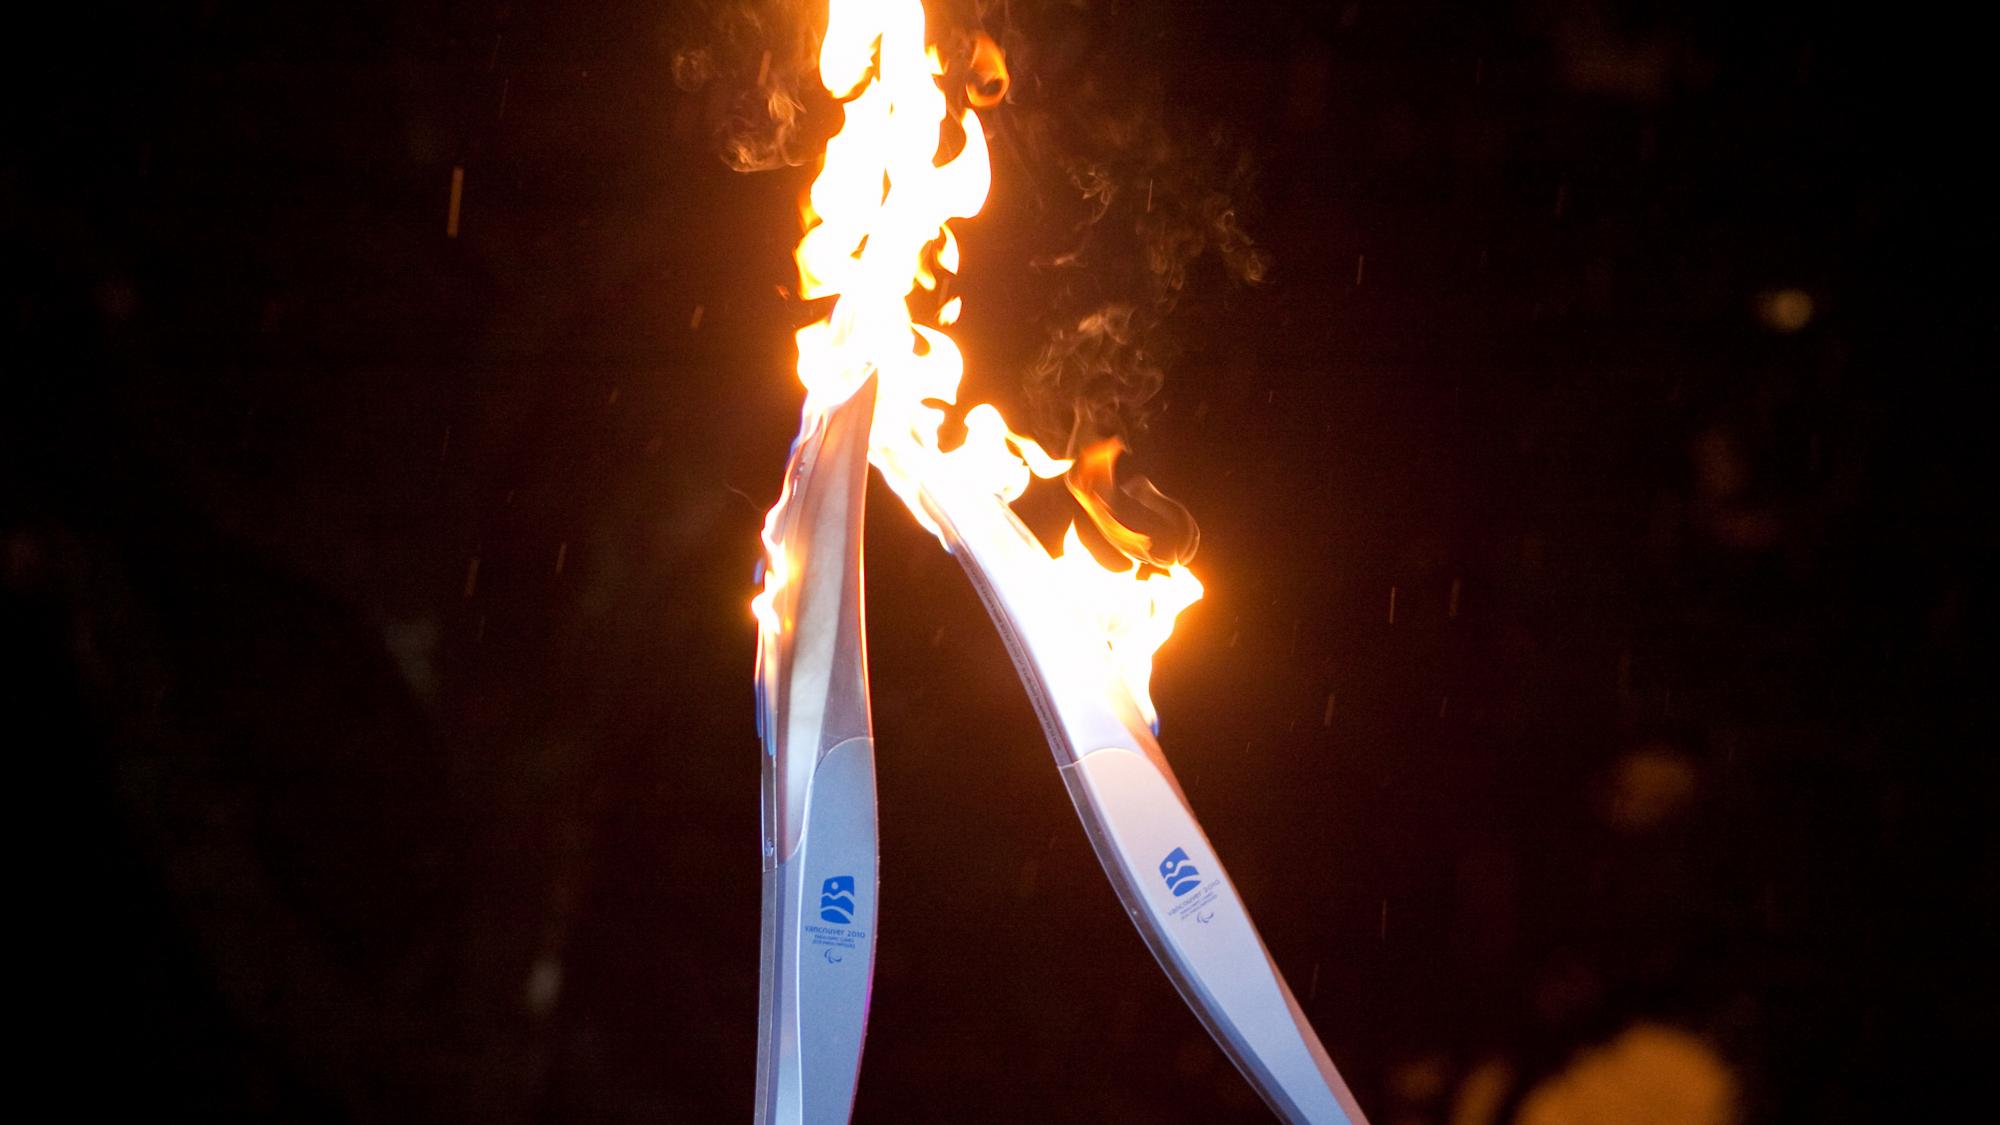 The Paralympic Torch Relay has become an integral part of the lead-up to the Paralympic Games.